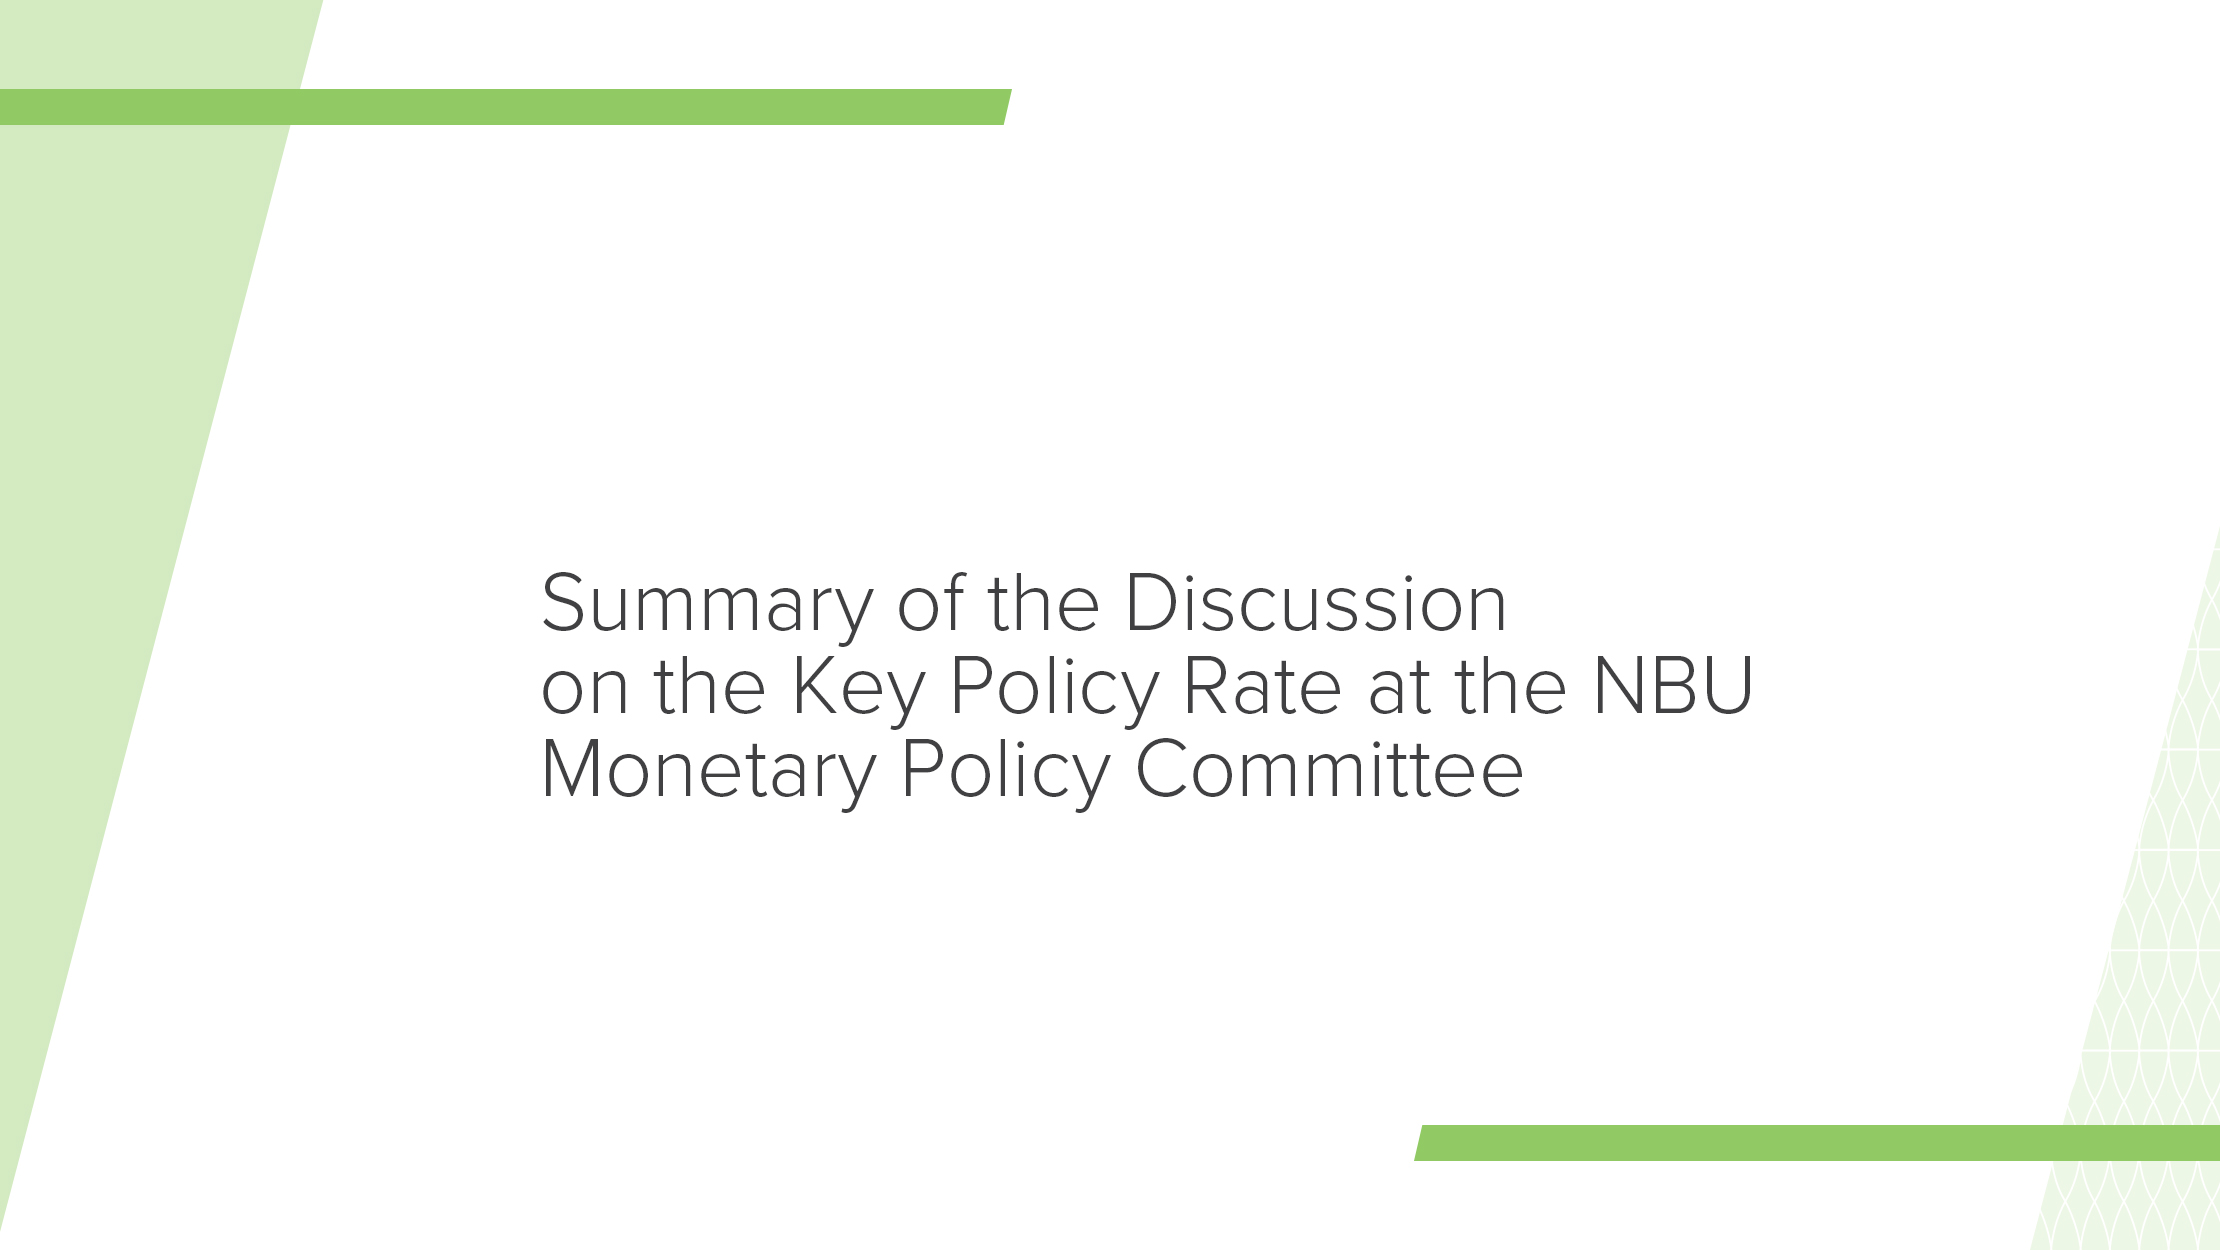 Summary of the Key Policy Rate Discussion by the NBU Monetary Policy Committee on 12 December 2018